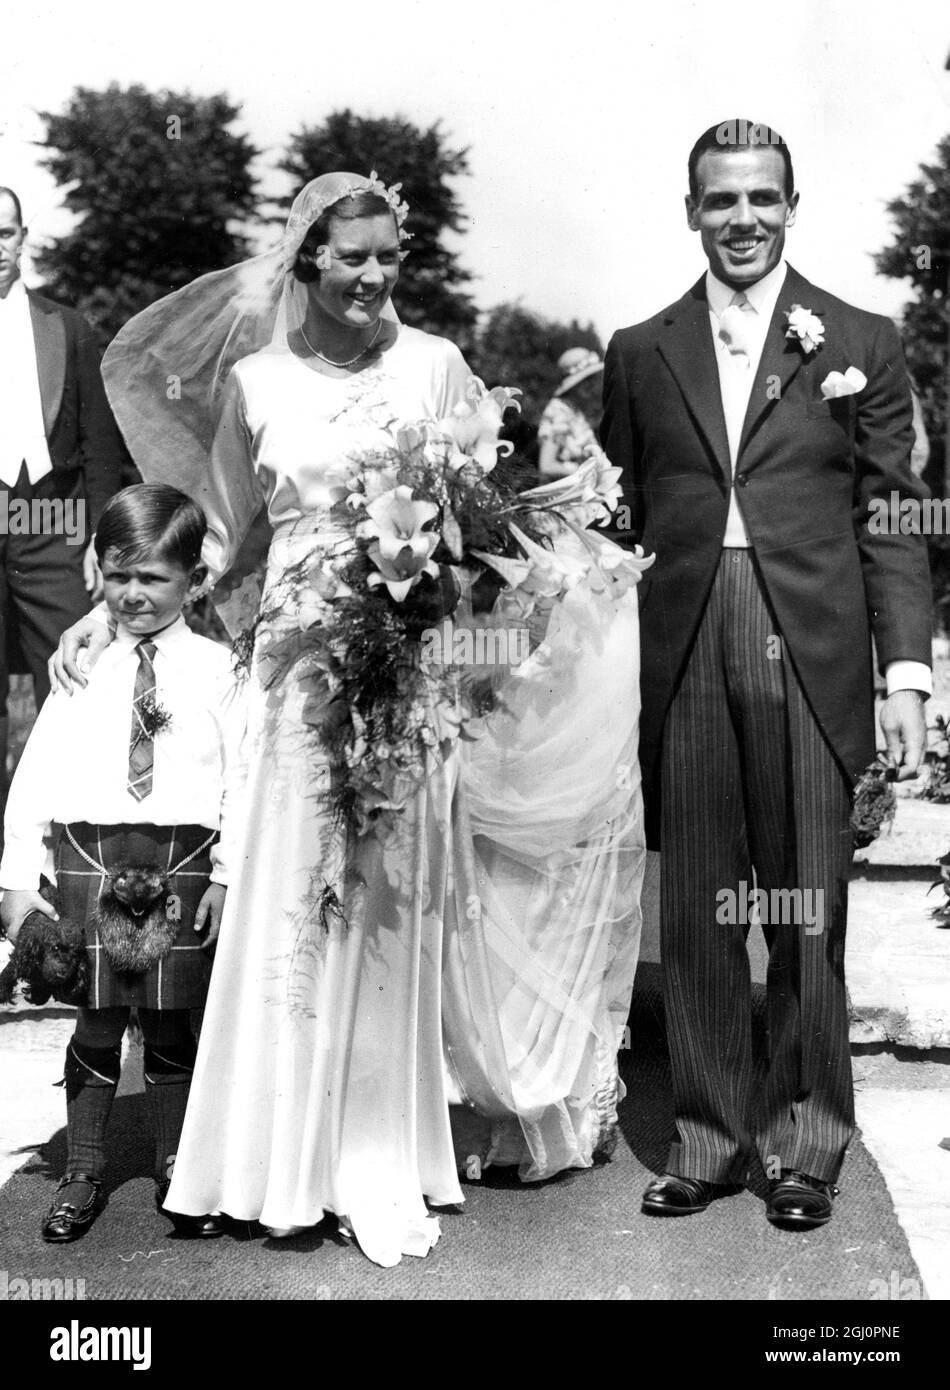 Miss Gwen Sterry, the English long tennis player, was married to Mr W.M. Simmers the Scottish rugby international player at Saint Marks Church, Surbiton, Surrey. A large gathering of tennis players attended, and Miss Betty Gwen Nuthall was among the bridesmaids. Photo shows the bride and groom with the tiny page master Hossack. 9 July 1932 Stock Photo